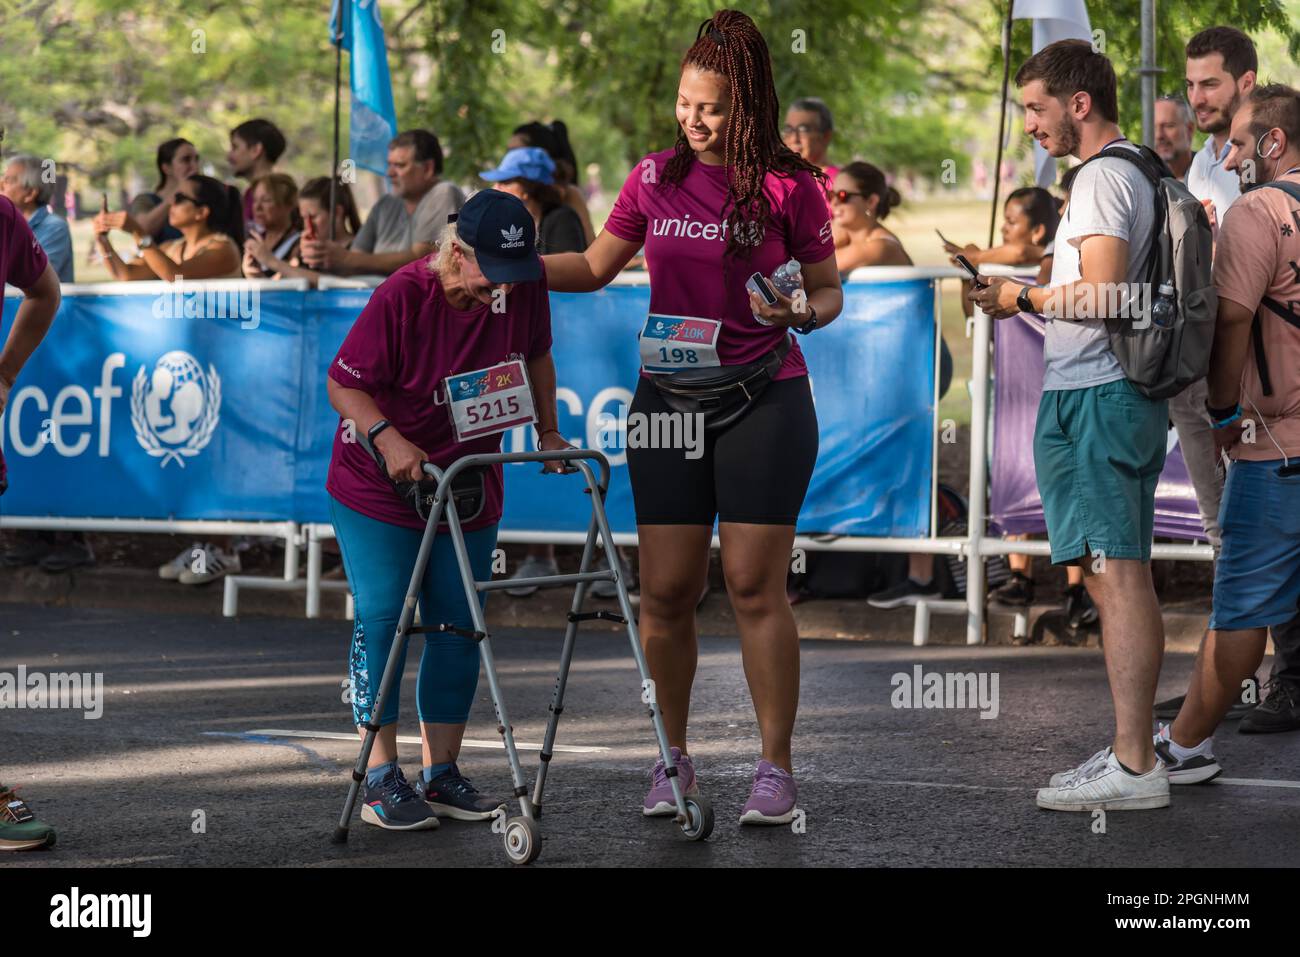 Buenos Aires, Argentina - March 19, 2023: UNICEF Race for Education. Senior woman with disabilities finishes race Stock Photo